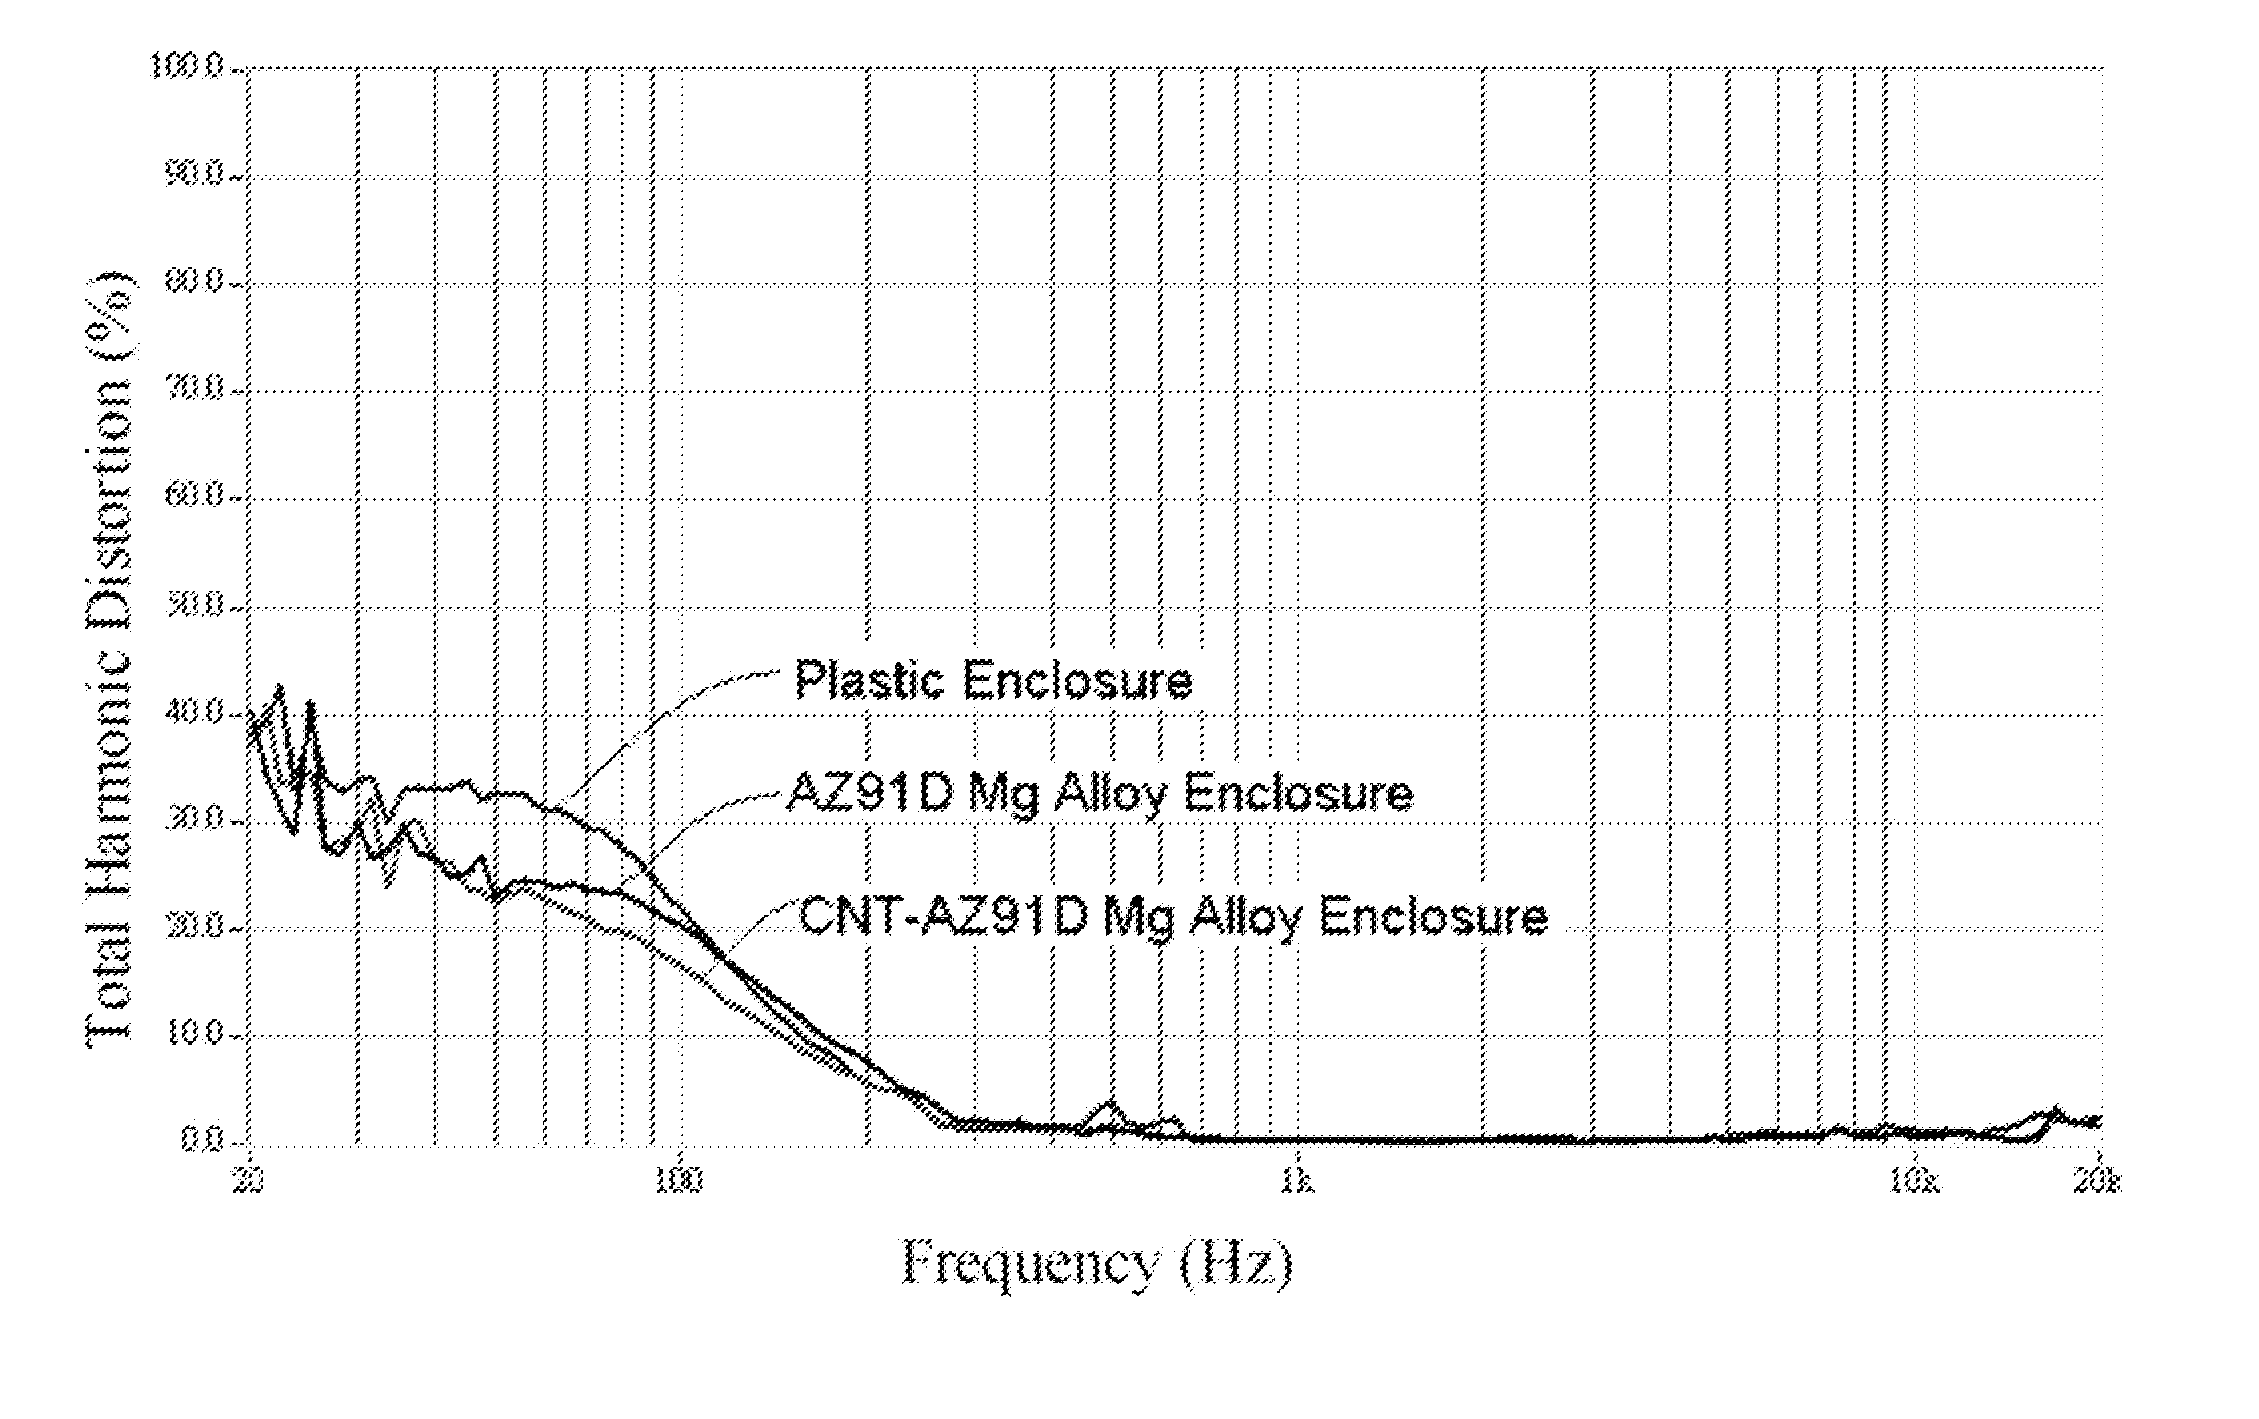 Magnesium based composite material and method for making the same